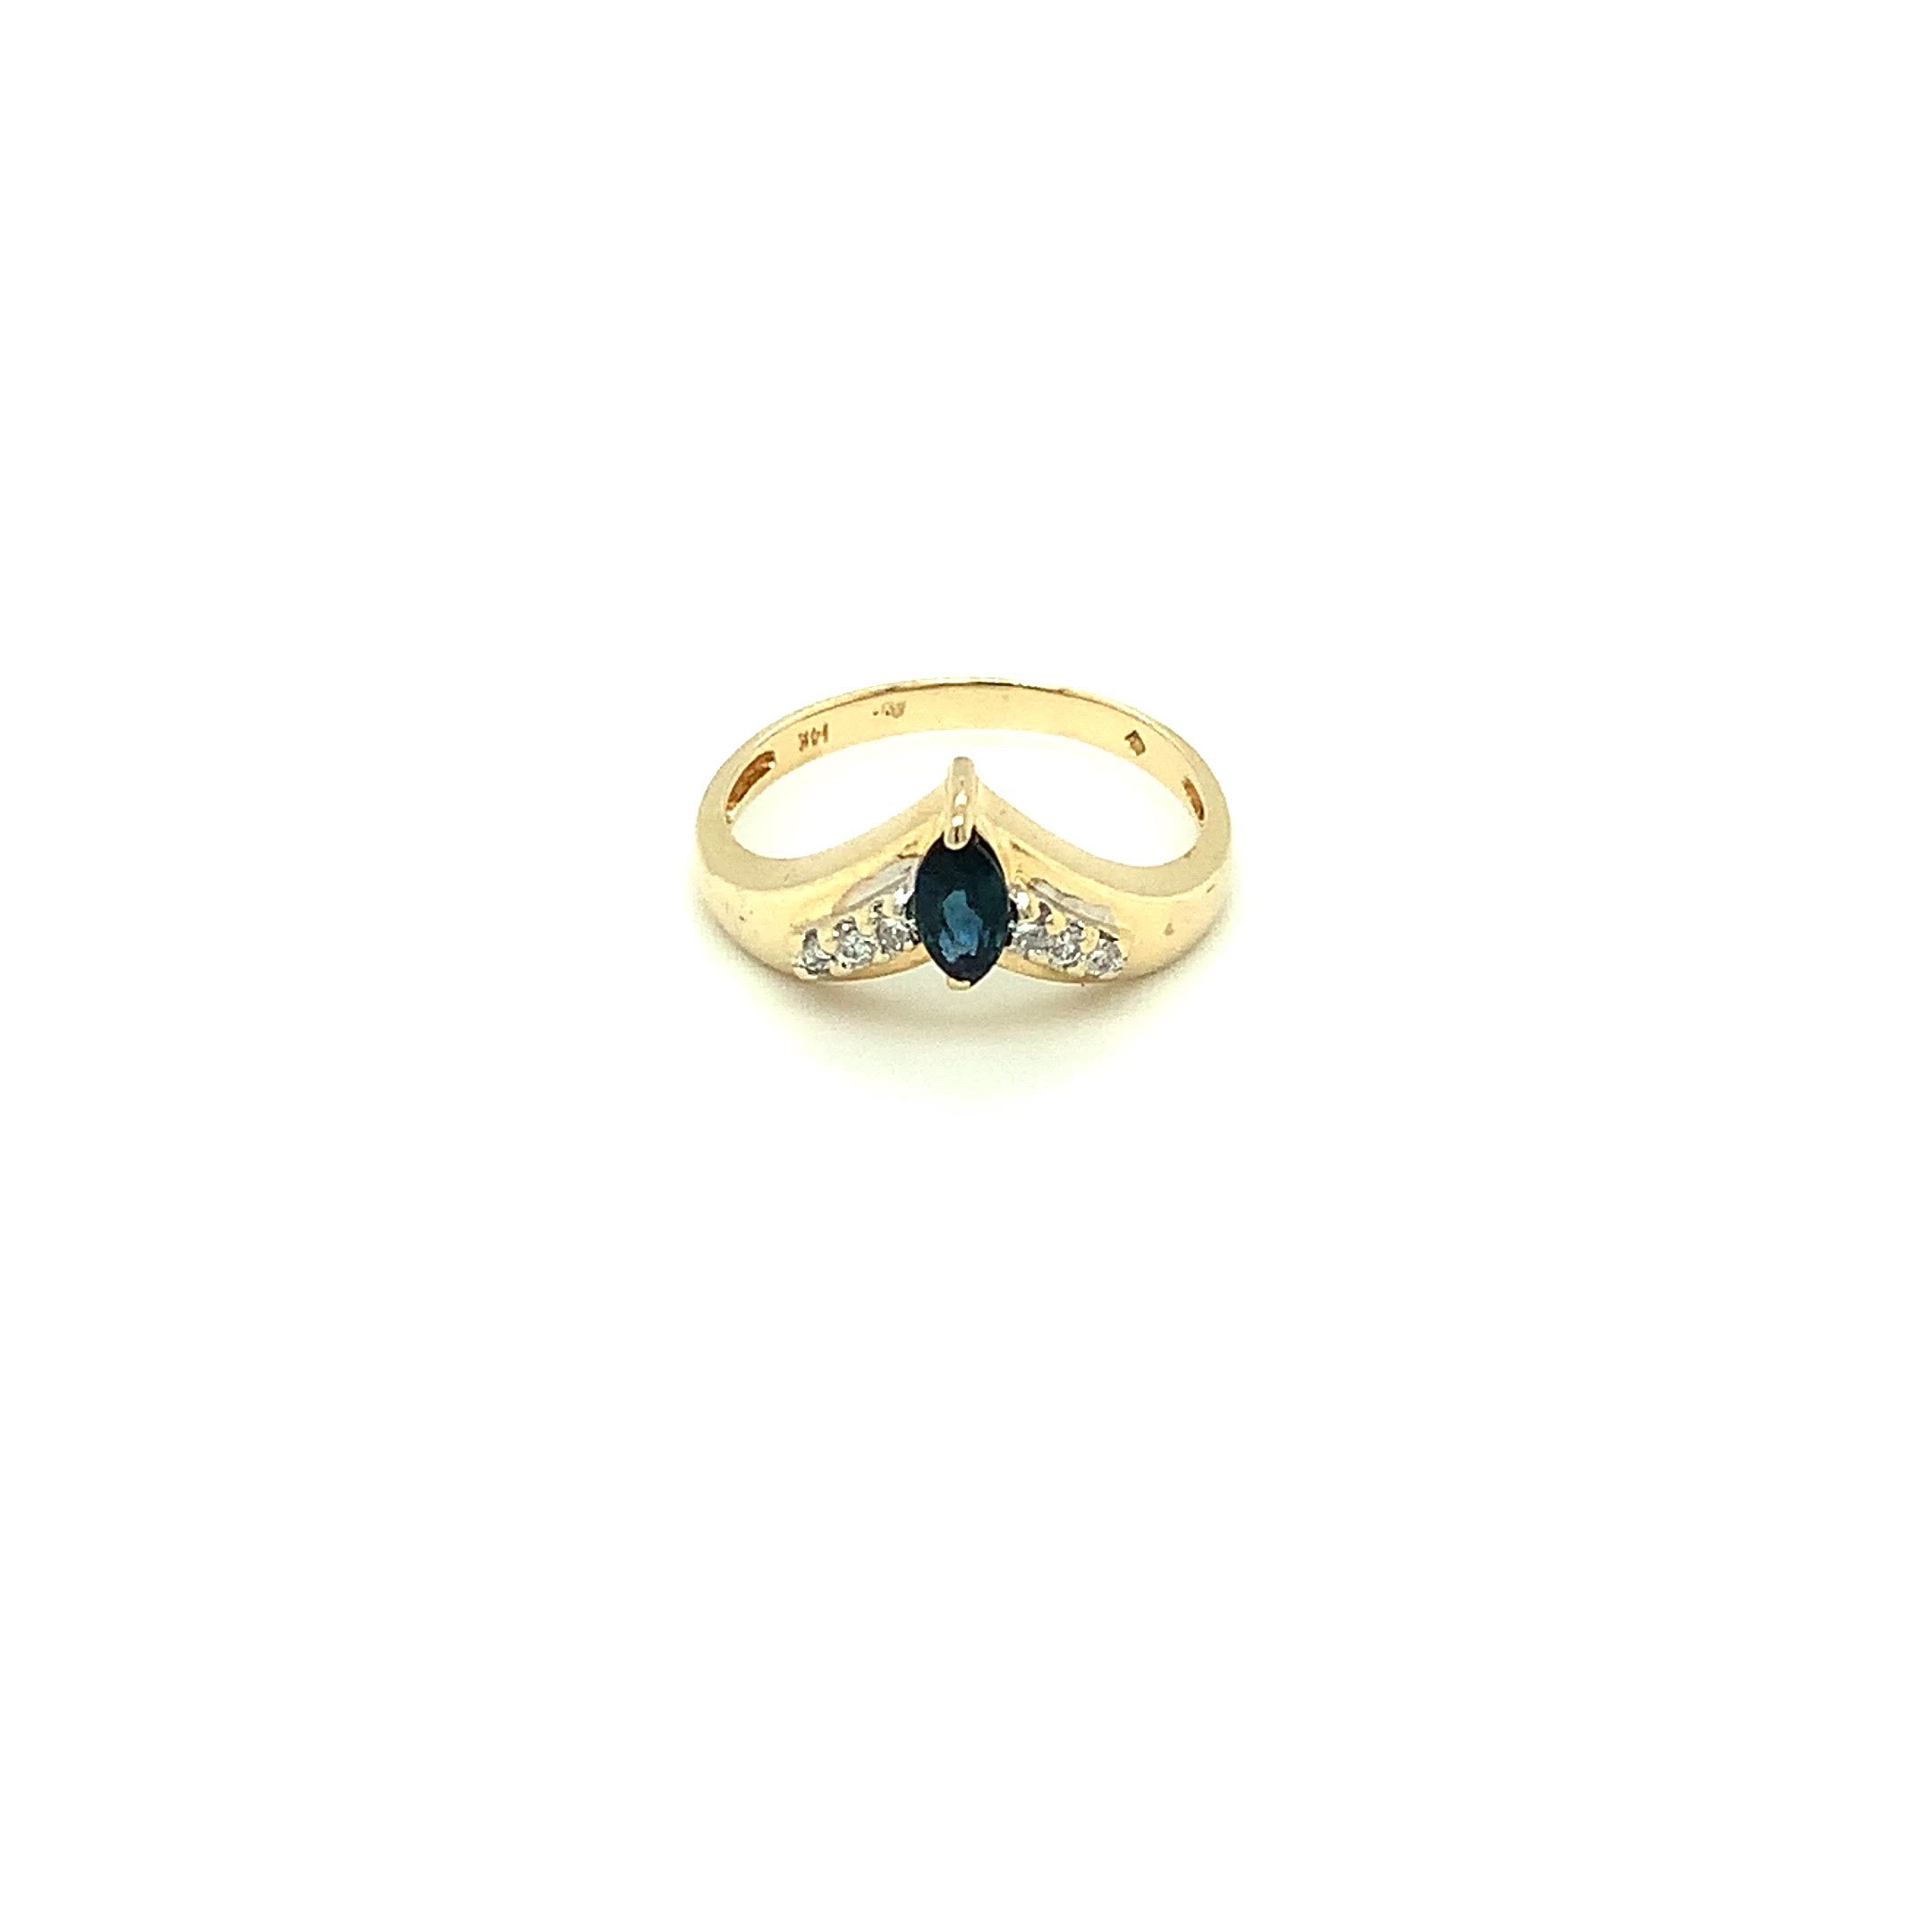 Natural Blue Sapphire & Diamond Ring 14K Solid Gold .41tcw September Birthstone Ring Vintage Ring Estate Ring Stackable Ring Women's Ring